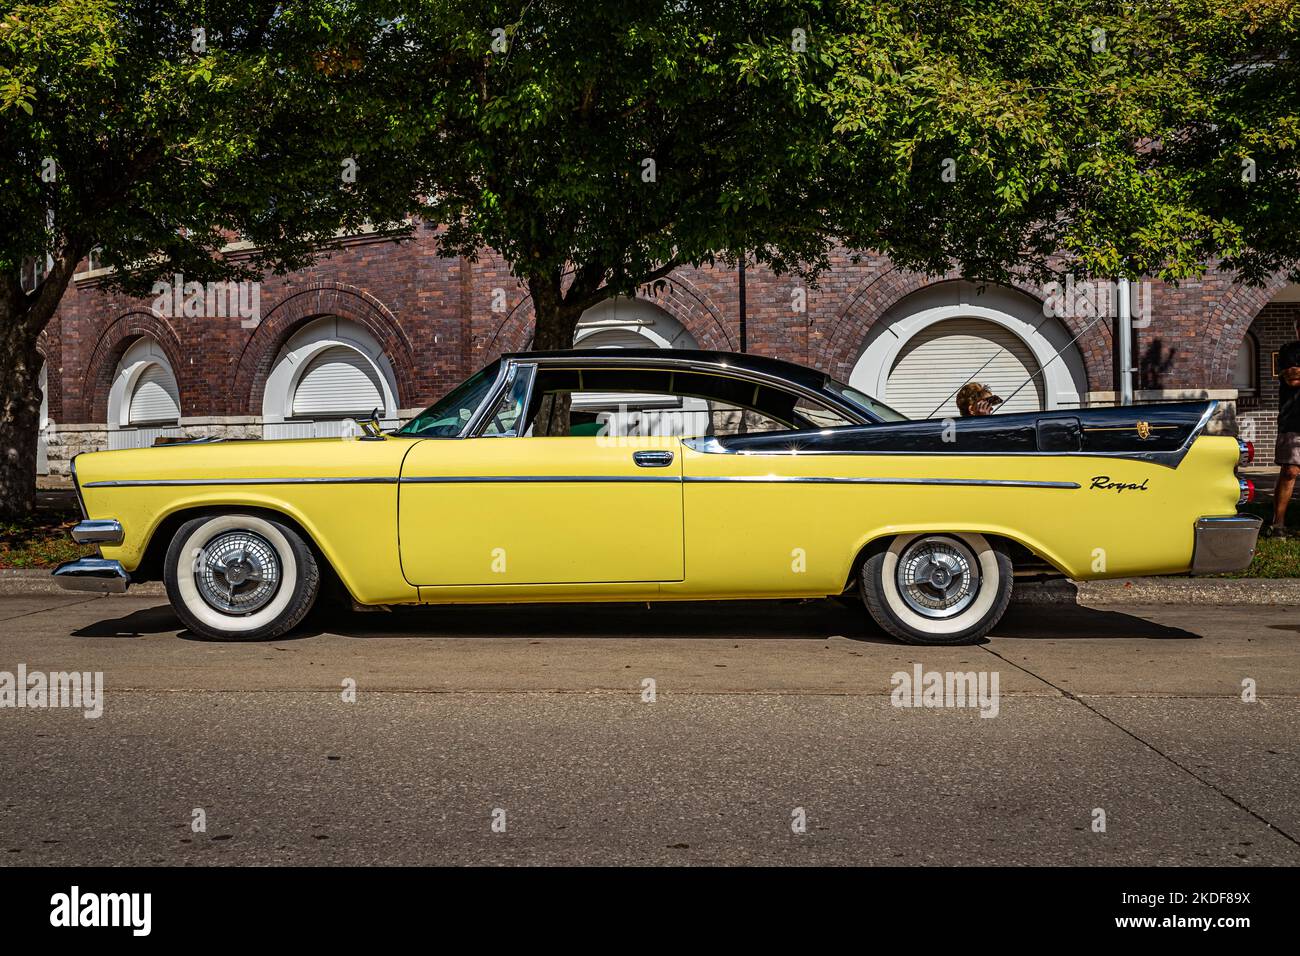 Des Moines, IA - July 01, 2022: Low perspective side view of a 1958 Dodge Royal Lancer 2 Door Hardtop at a local car show. Stock Photo